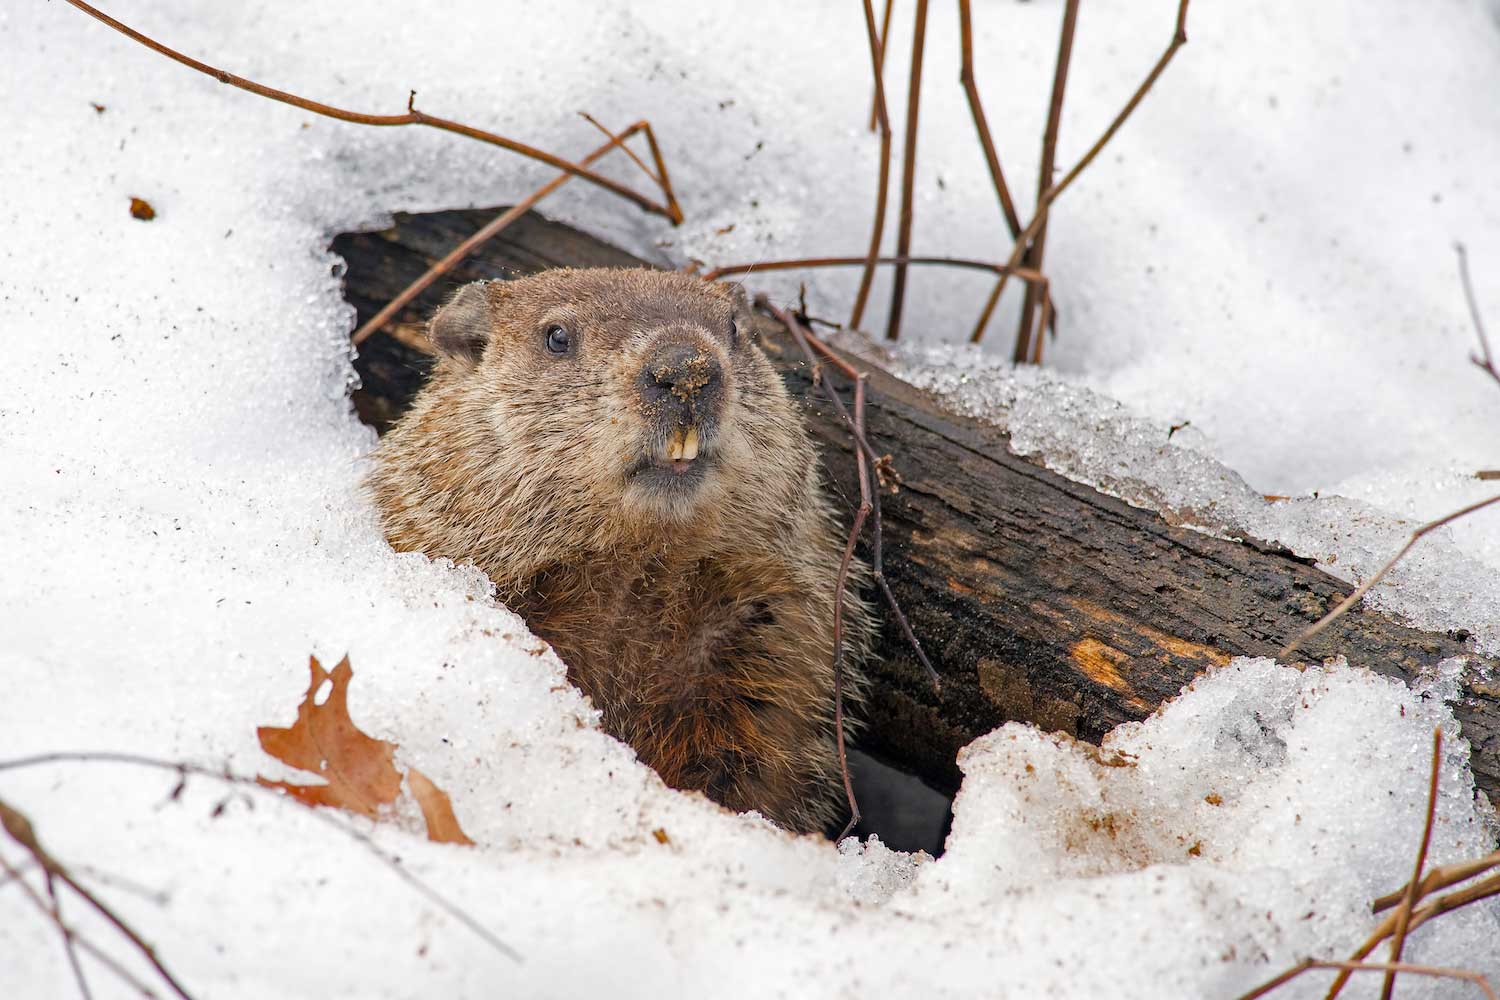 A groundhog peeking out from its burrow surrounded by snow.